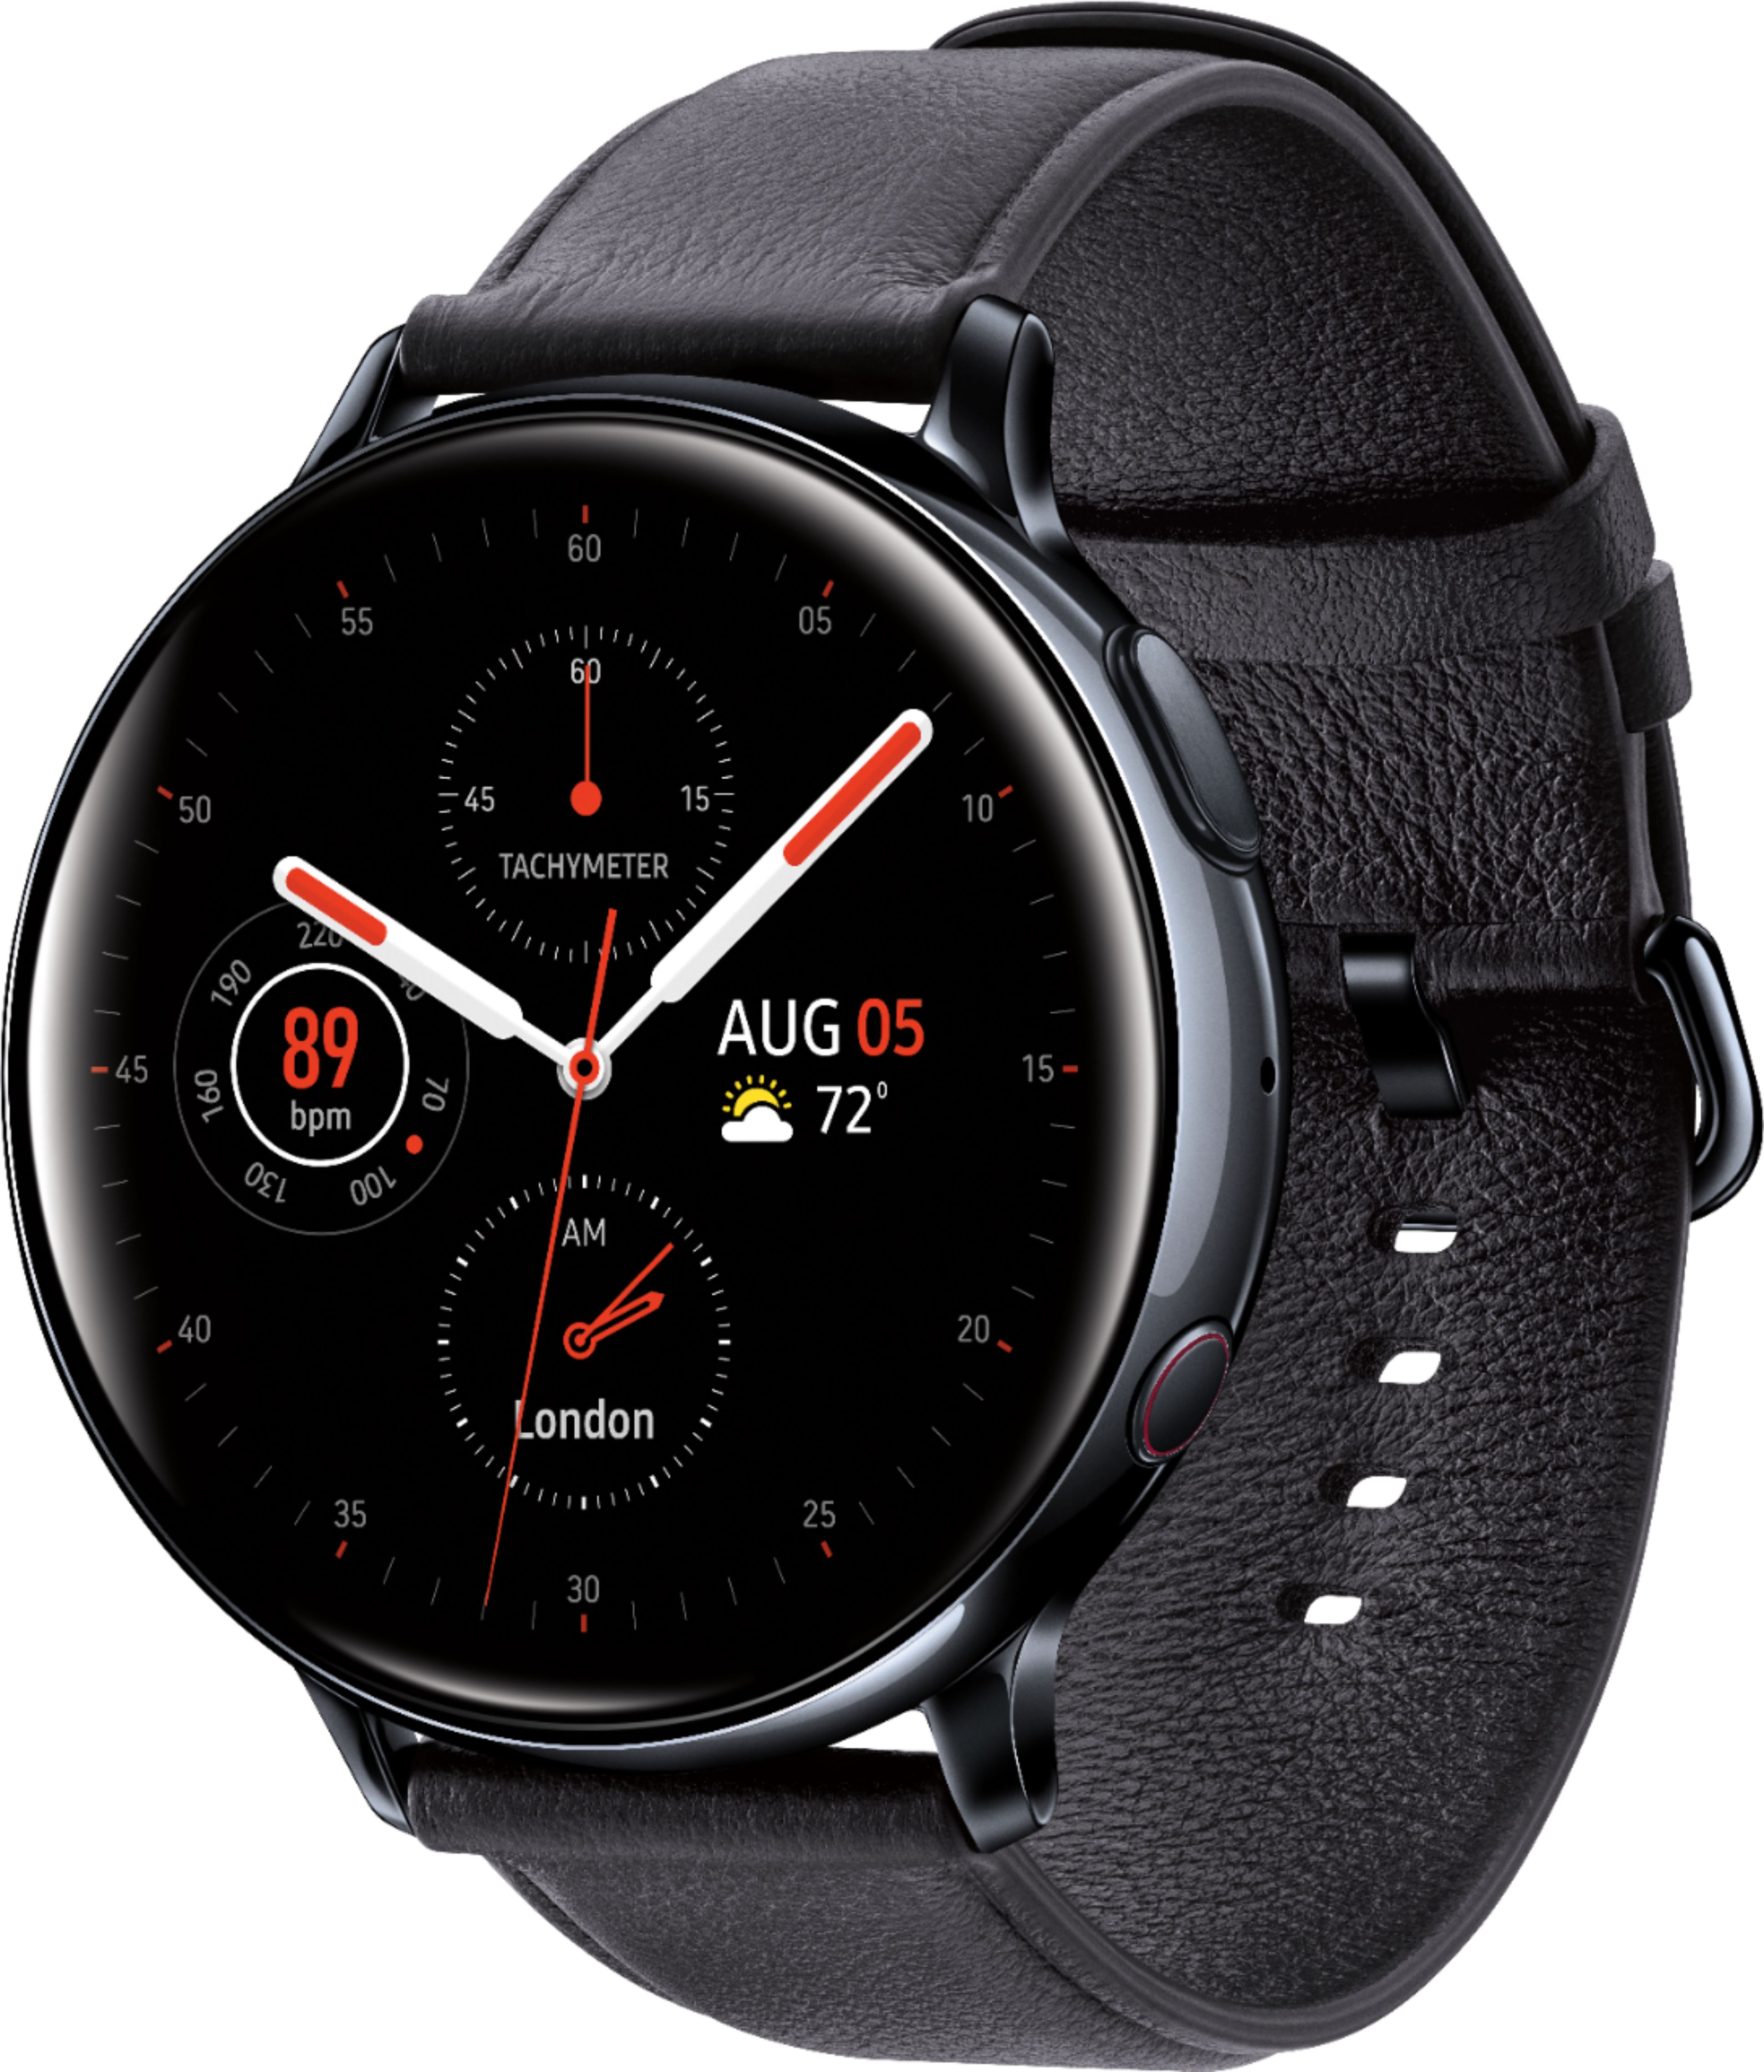 Angle View: Samsung - Geek Squad Certified Refurbished Galaxy Watch Active2 Smartwatch 44mm Stainless Steel LTE (Unlocked) - Black